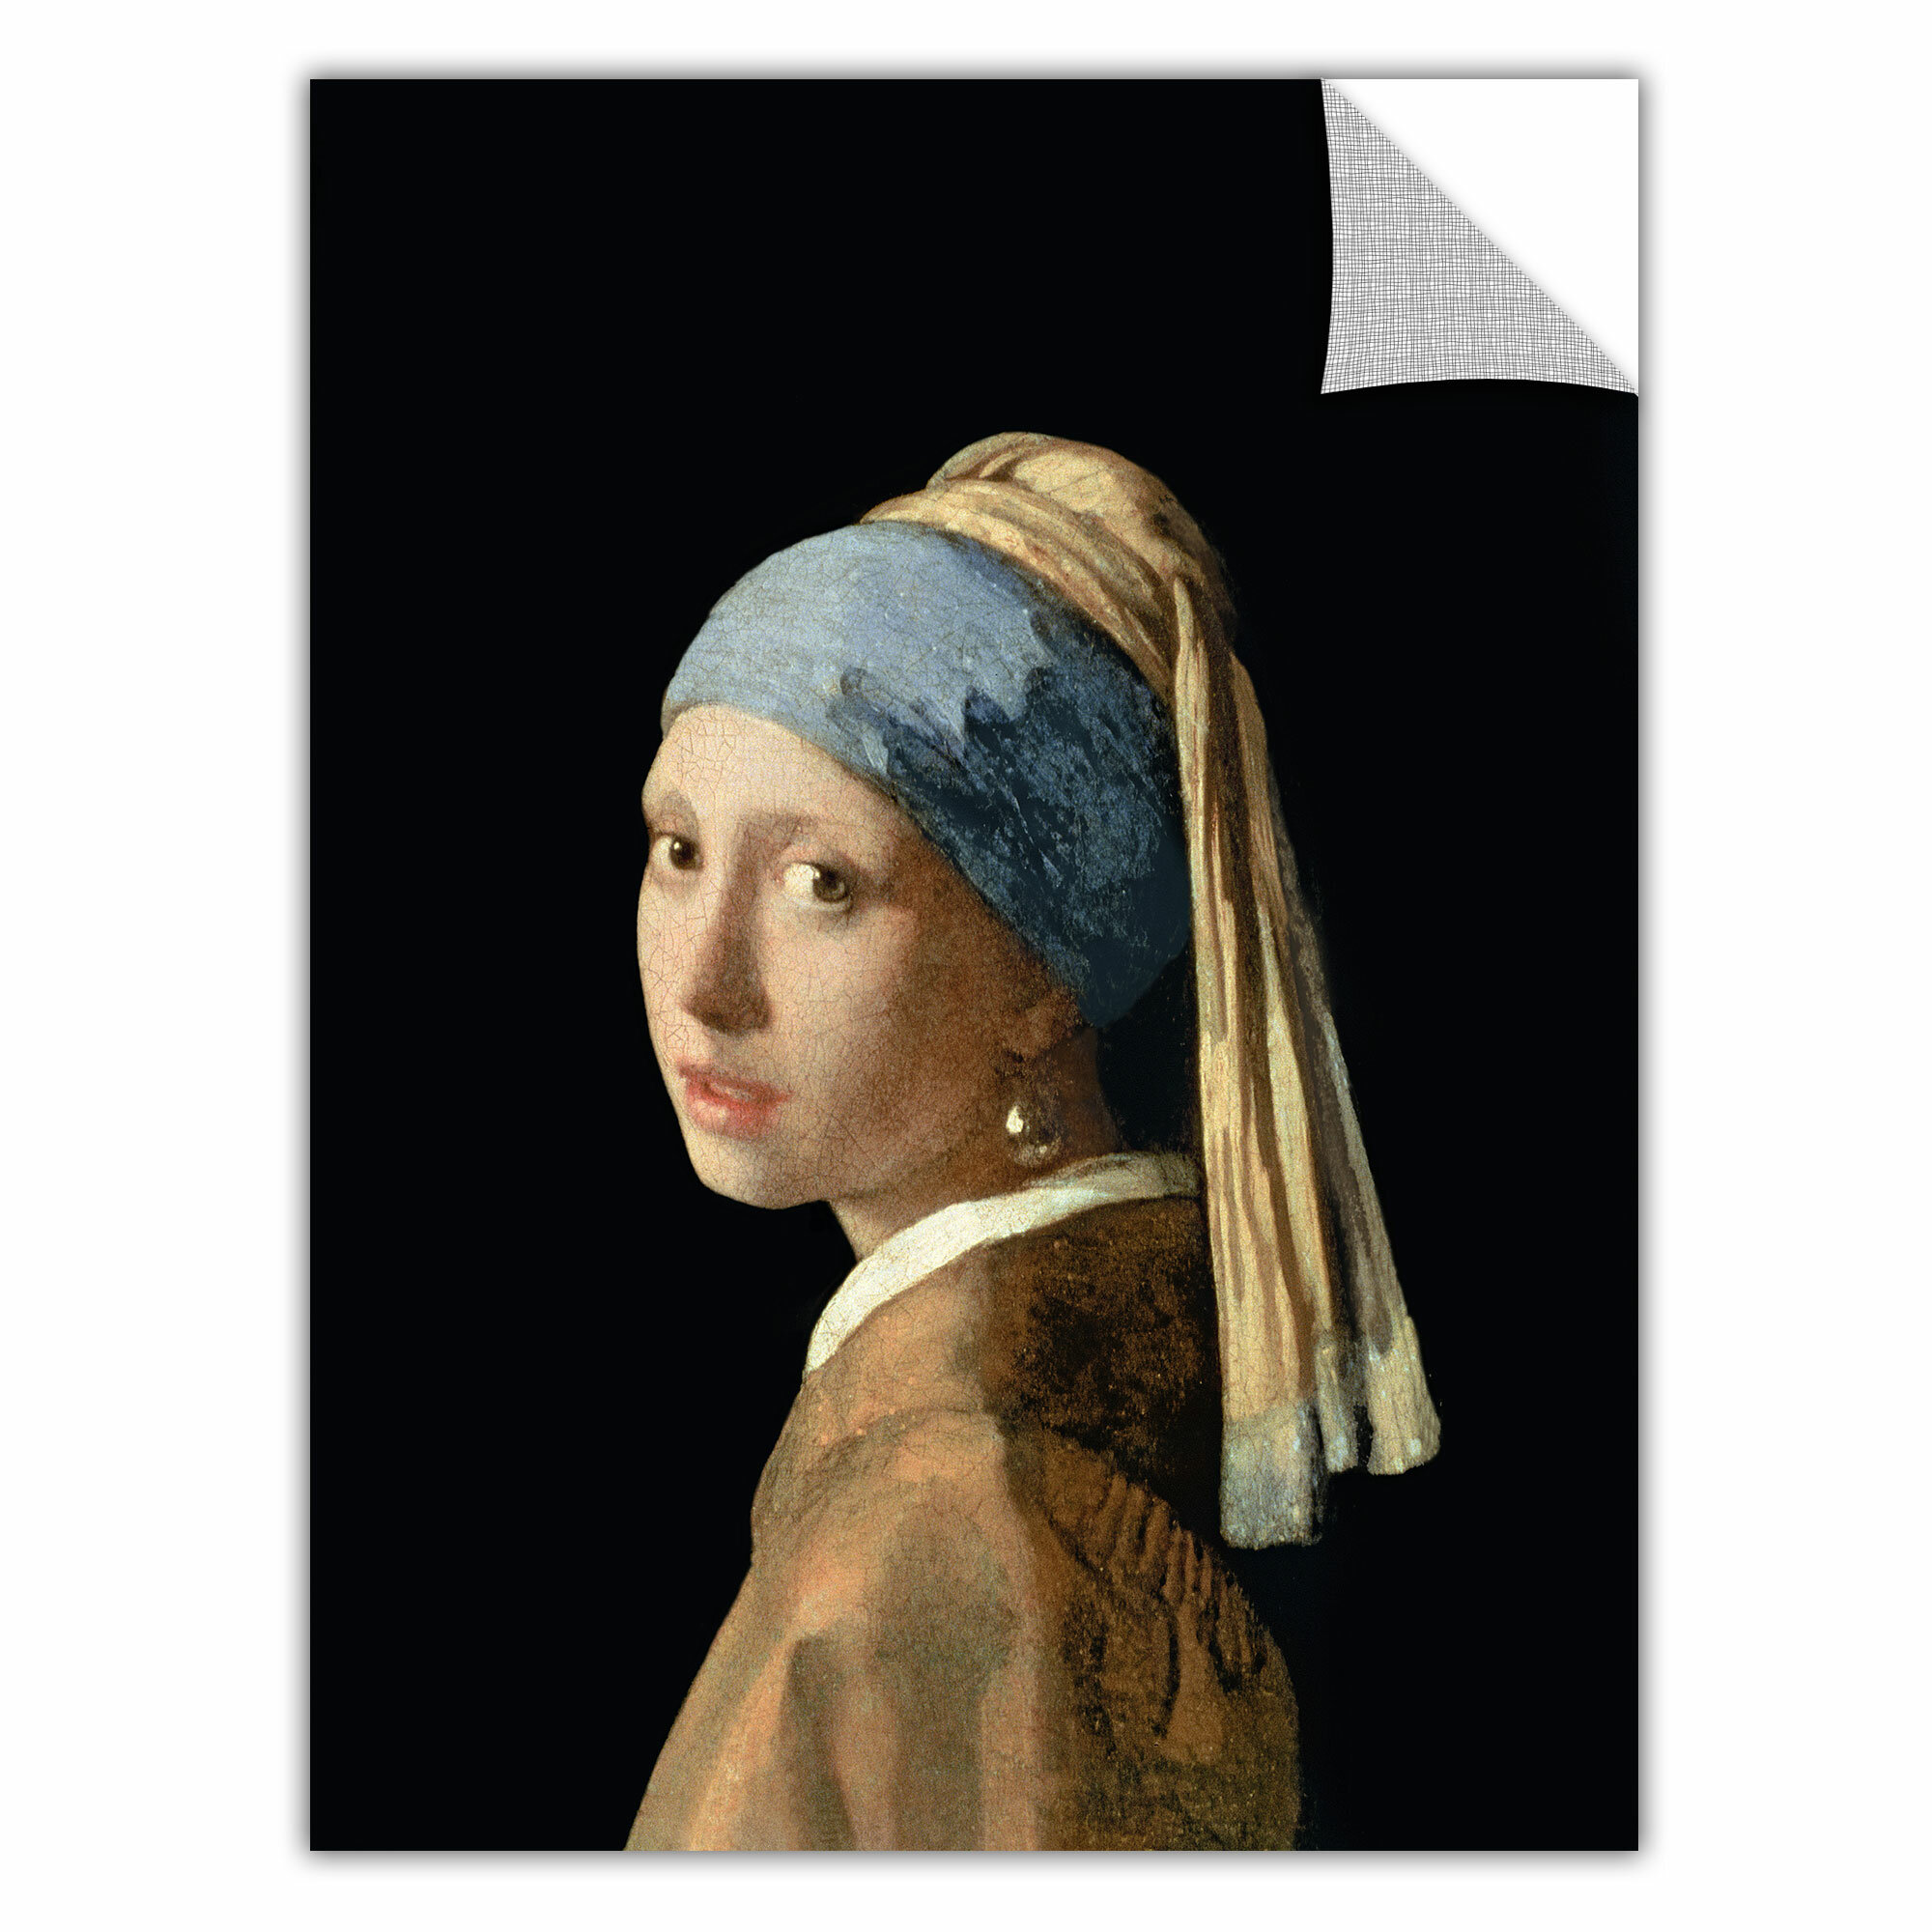 Girl With The Pearl Earring Fabric Novelty Shower Curtain Museum Collection by artist Johannes Vermeer 